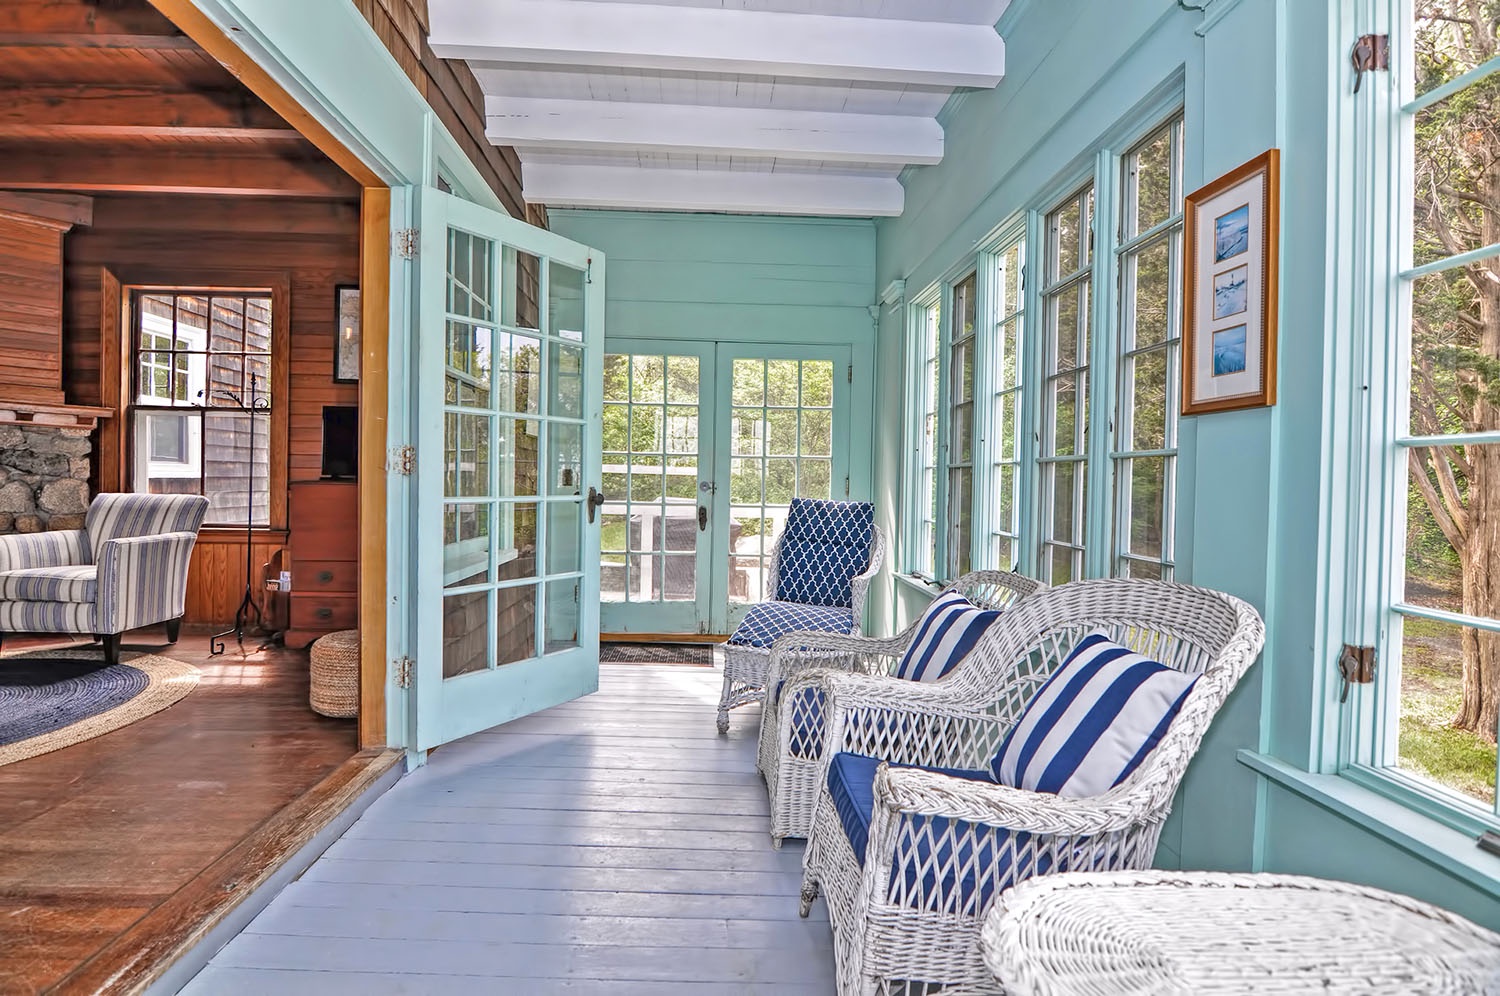 The sun porch is perfect to unwind, relax, or read a book.